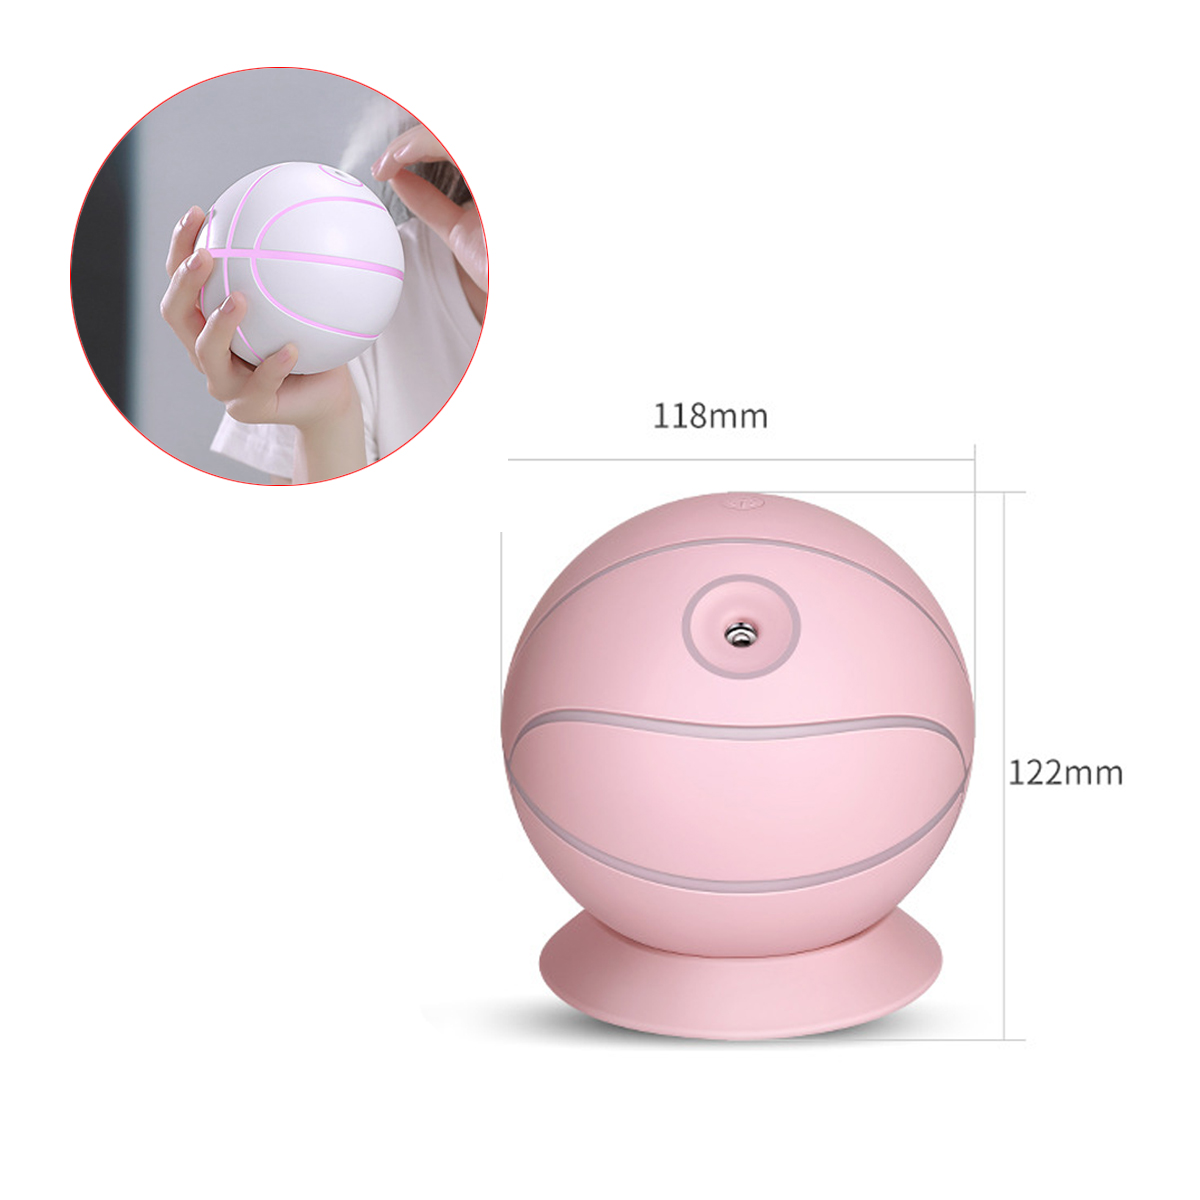 240ml-Adjustable-Angle-USB-Rechargable-Handheld-Water-Meter-Charging-Mini-Steamed-Humidifier-1444950